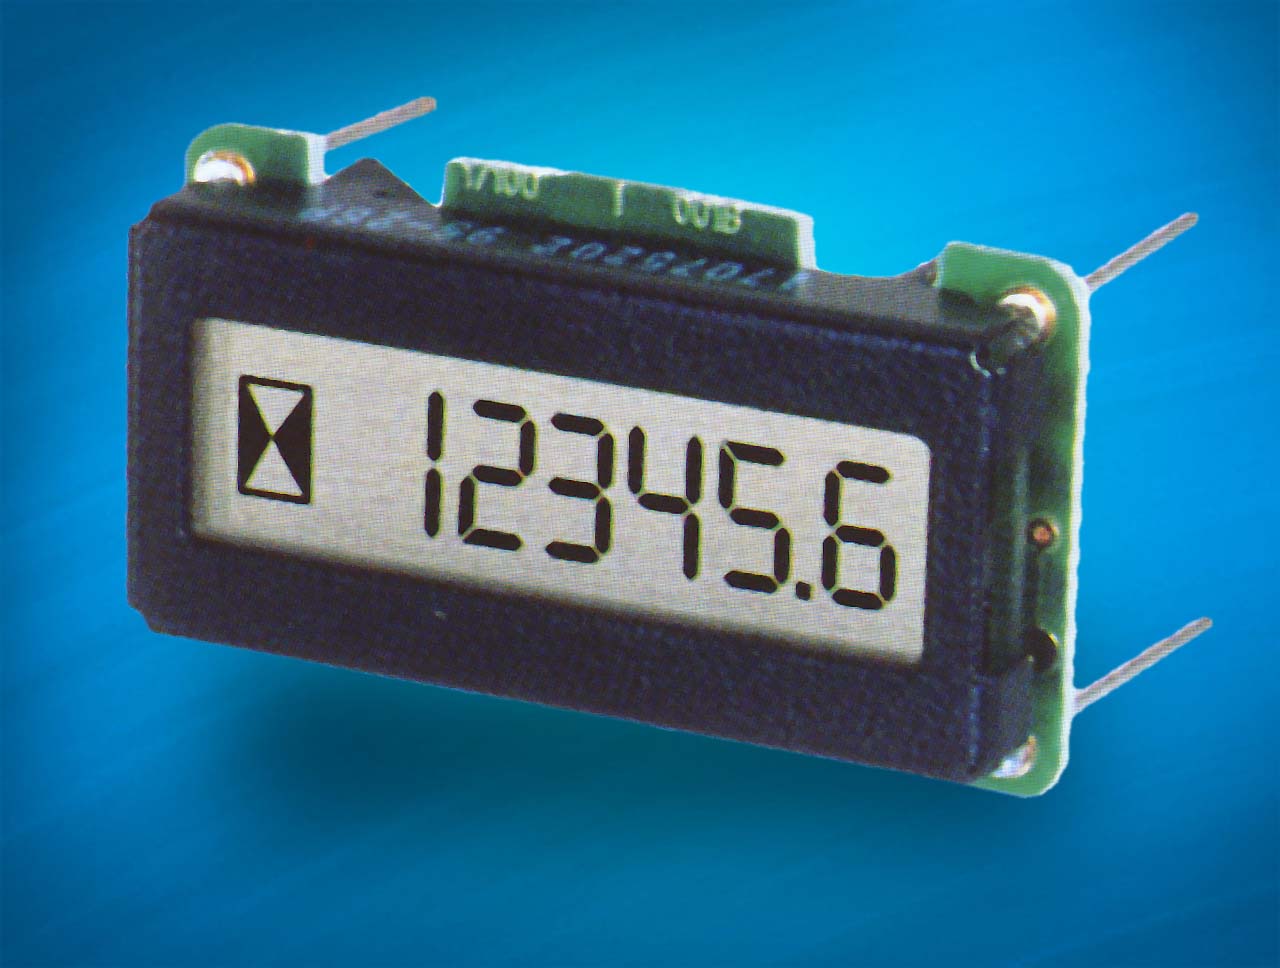 EA 2070: 6 digit counter with EEPROM